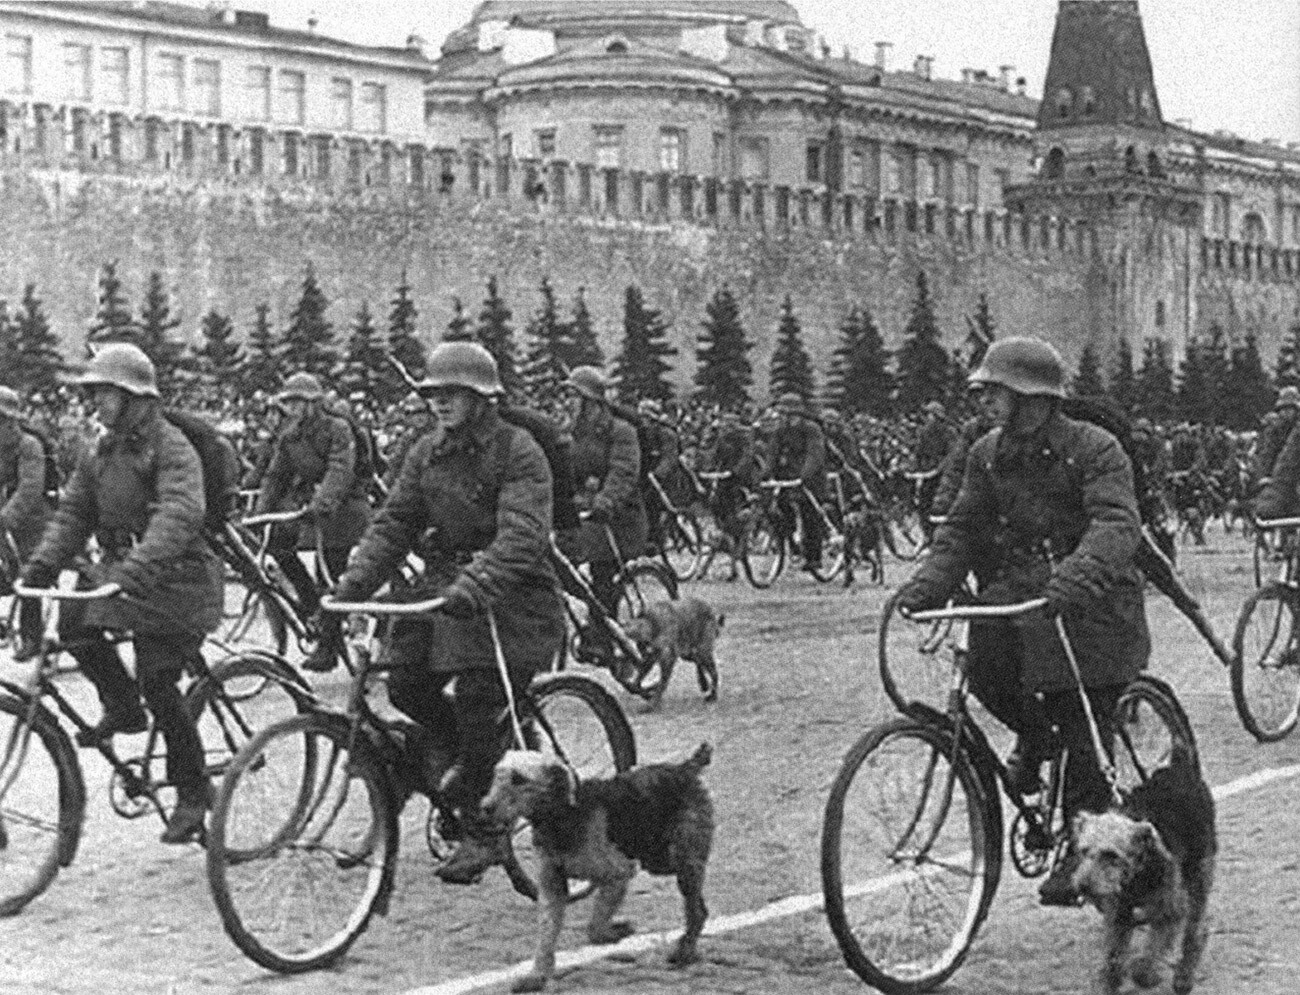 Bicycle troops during the parade on Red Square, 1938.